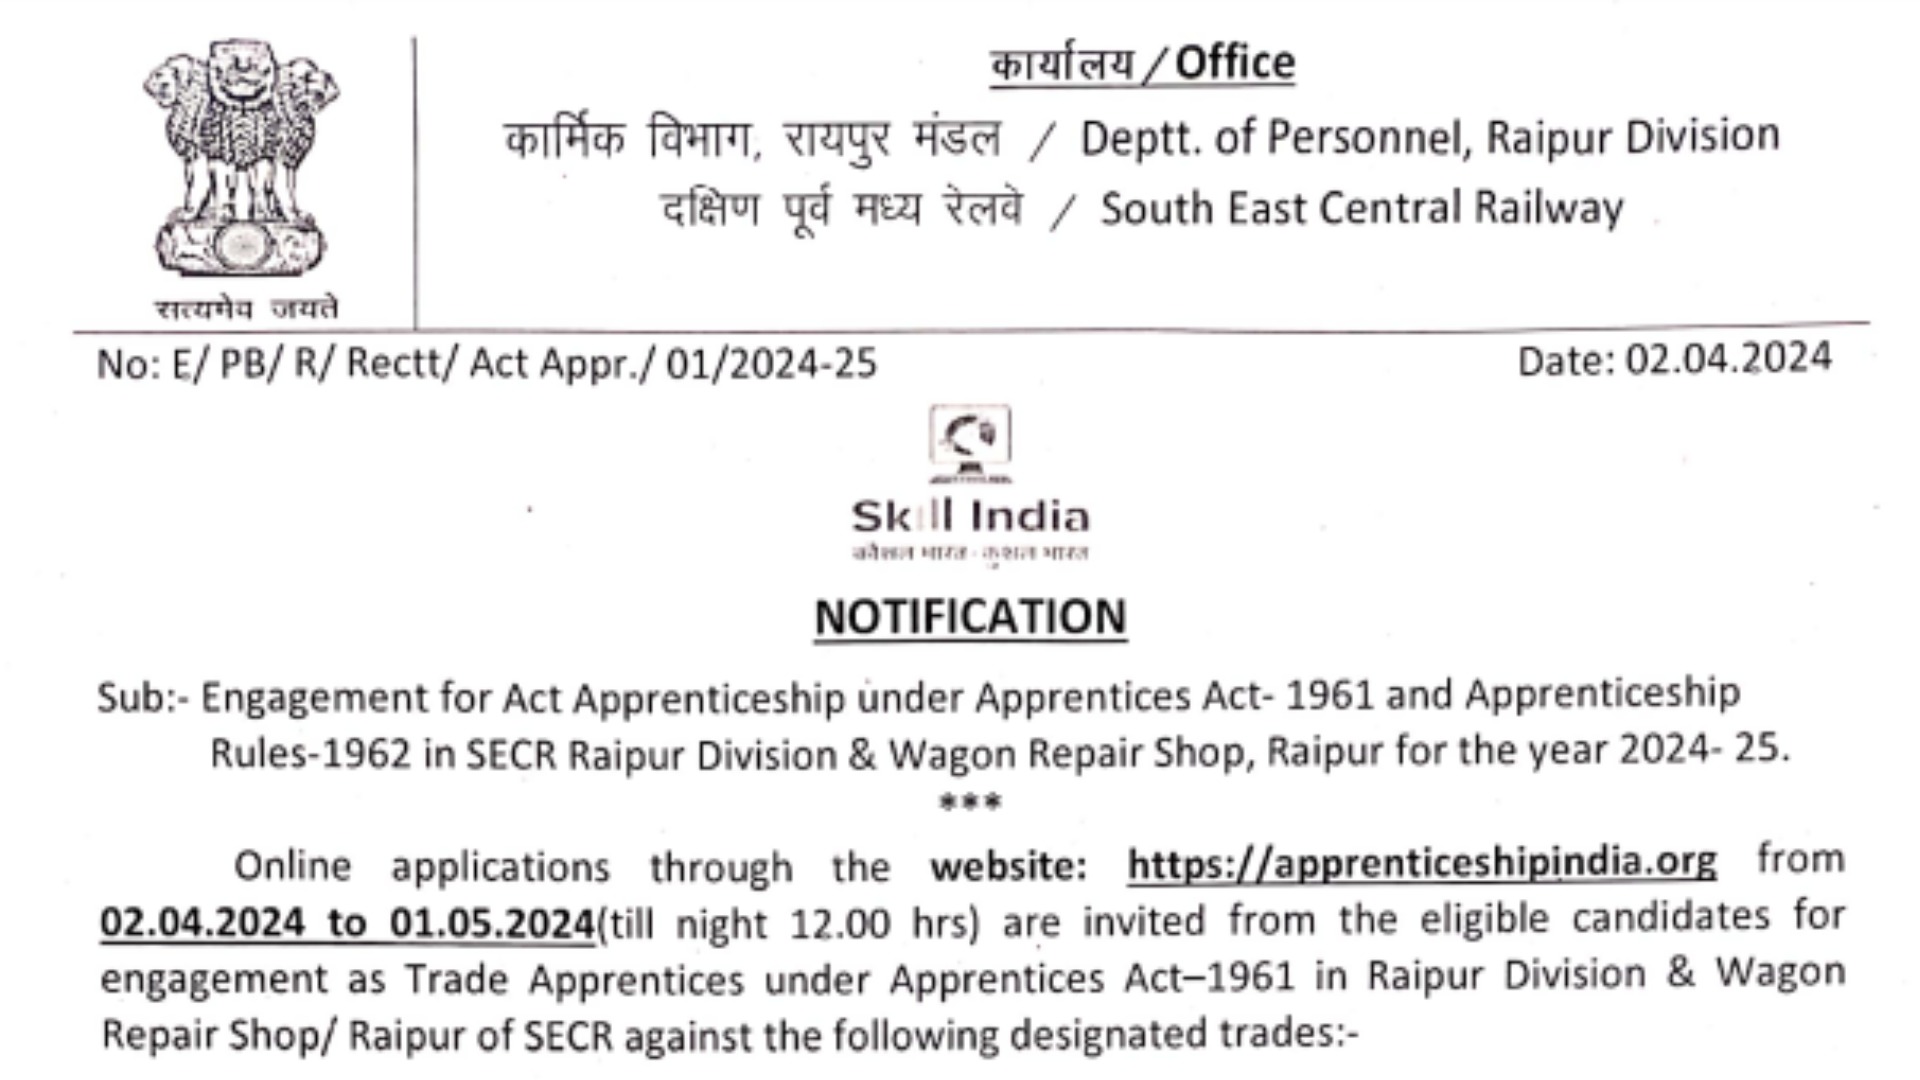 South East Central Railway SECR Various Trade Apprentices 2024 Apply Online for 1113 Post